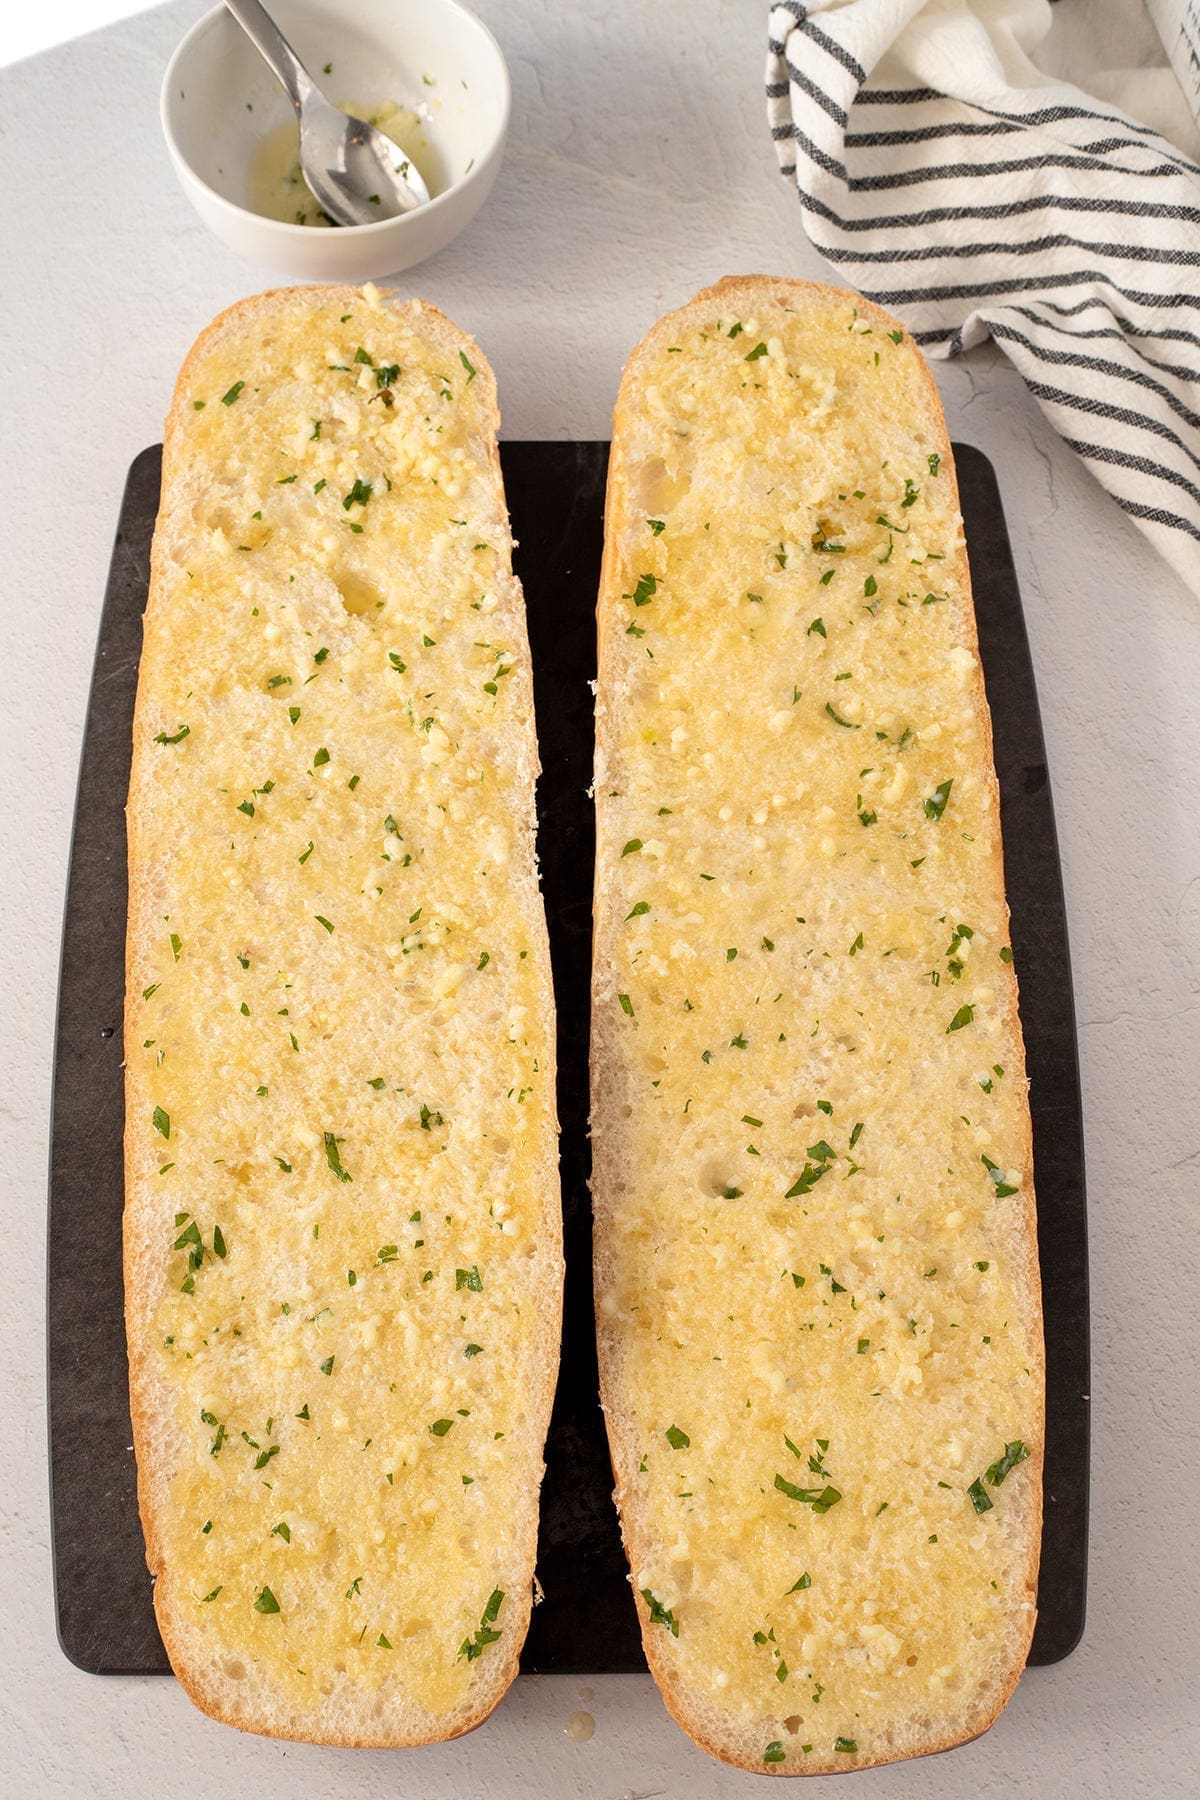 French bread sliced in half covered in garlic butter.